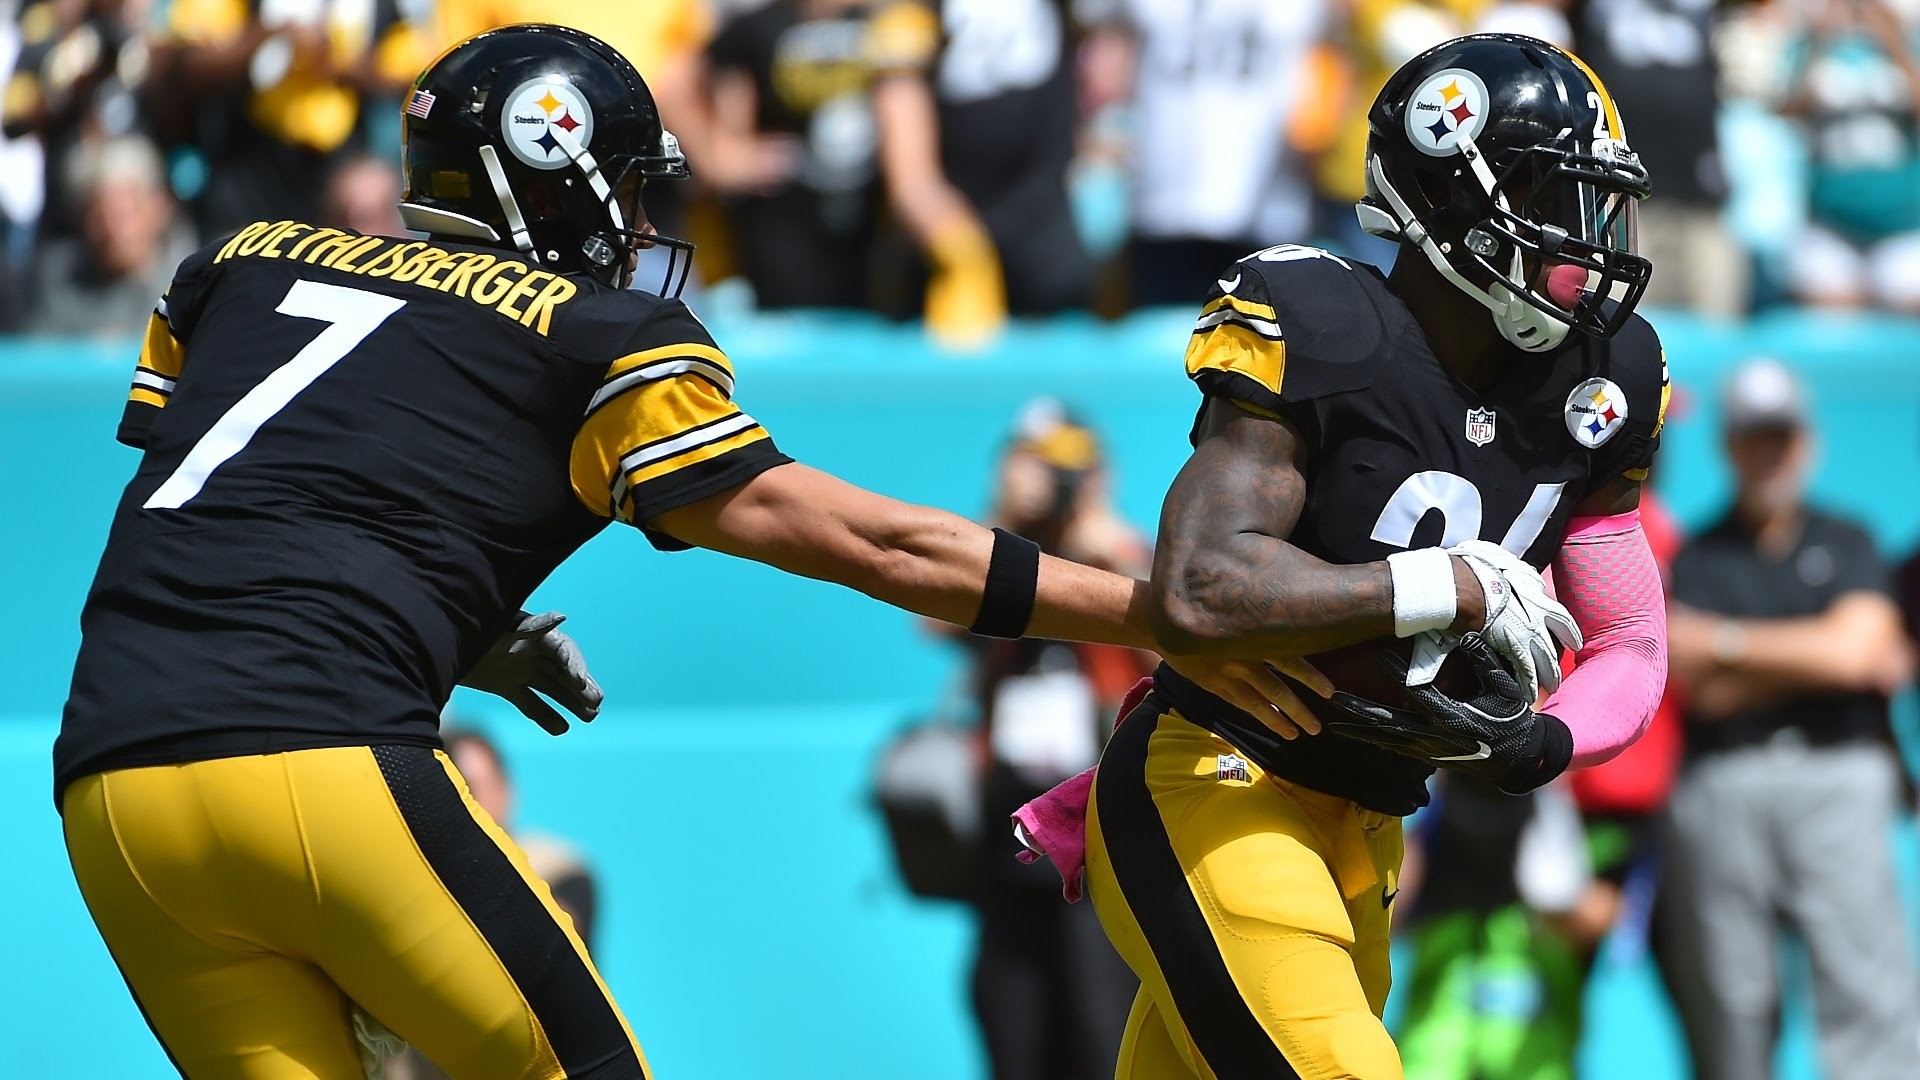 Big Ben Talks Le'Veon for MVP | Listen to Steelers QB Ben Roethlisberger  campaign for Le'Veon Bell